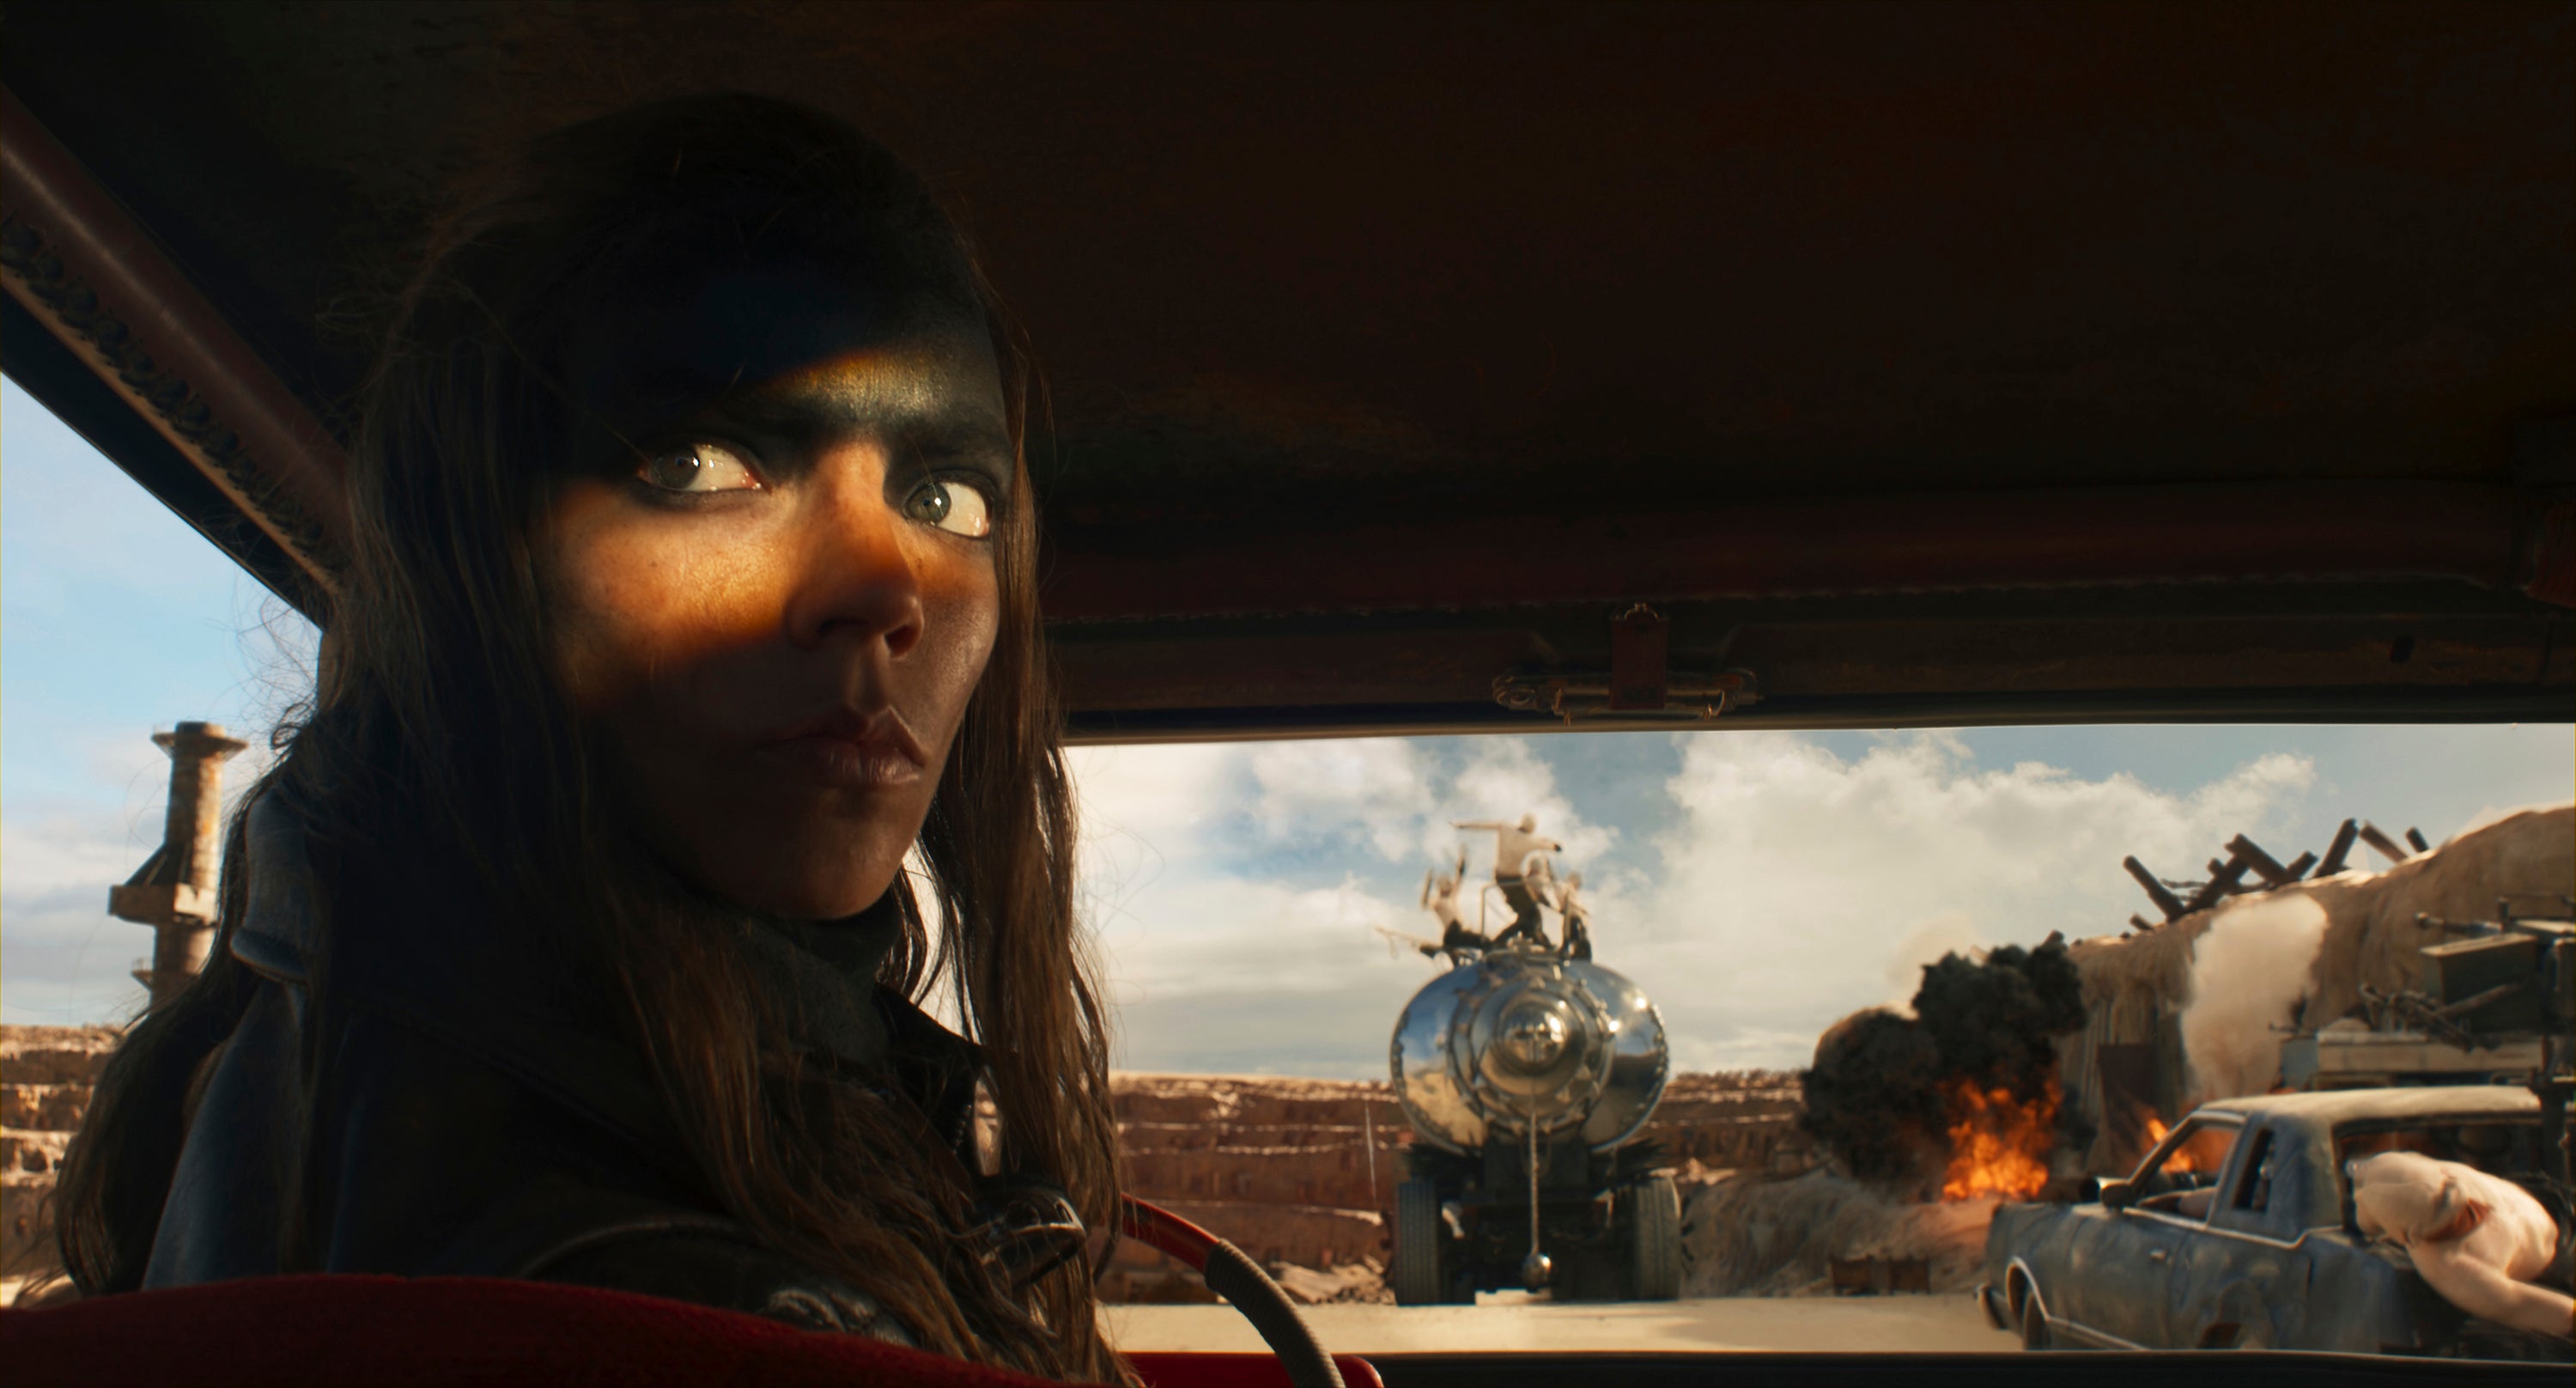 furiosa: early reviews call mad max prequel ‘powerhouse action filmmaking’